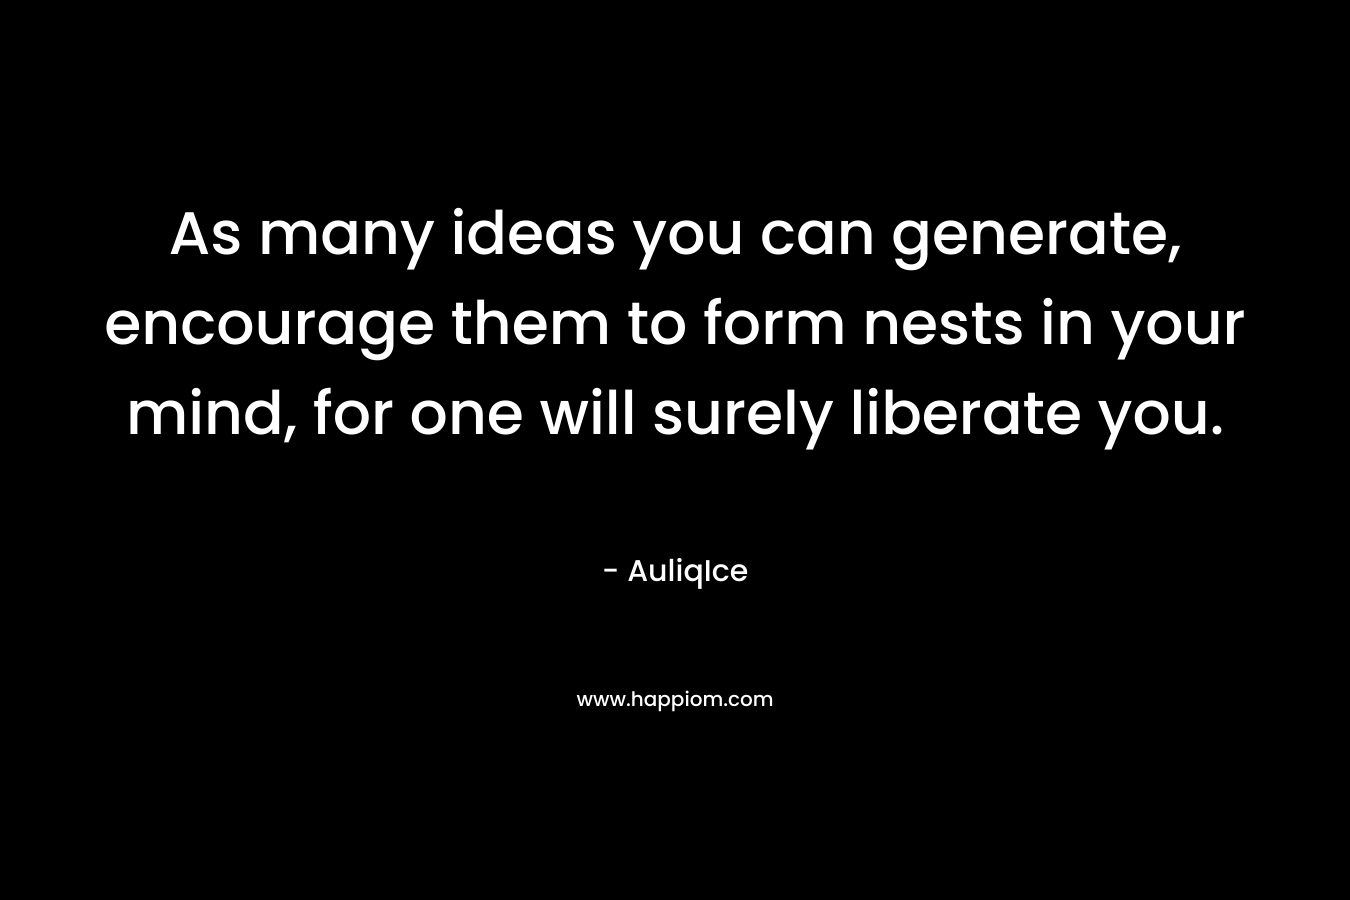 As many ideas you can generate, encourage them to form nests in your mind, for one will surely liberate you. – AuliqIce